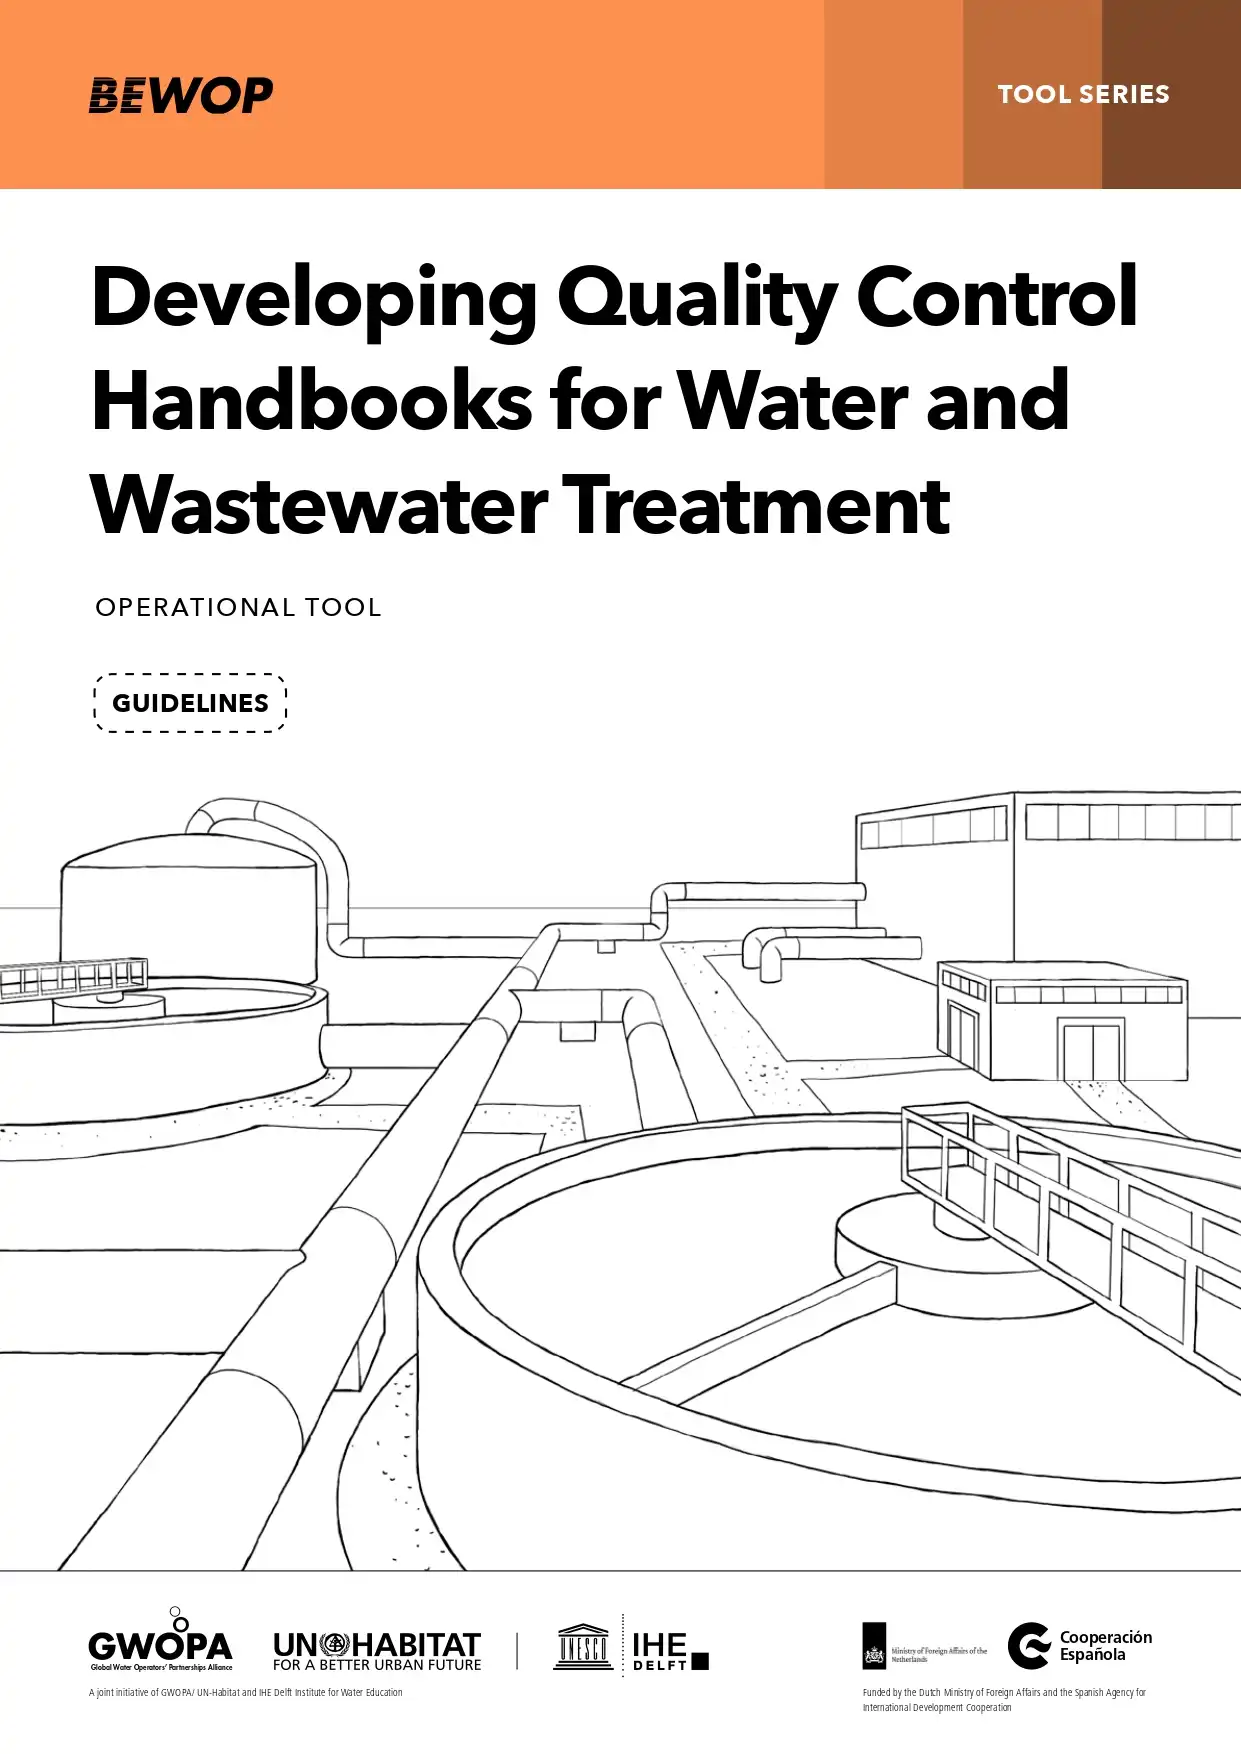 Developing Quality Control Handbooks for Water and Wastewater Treatment